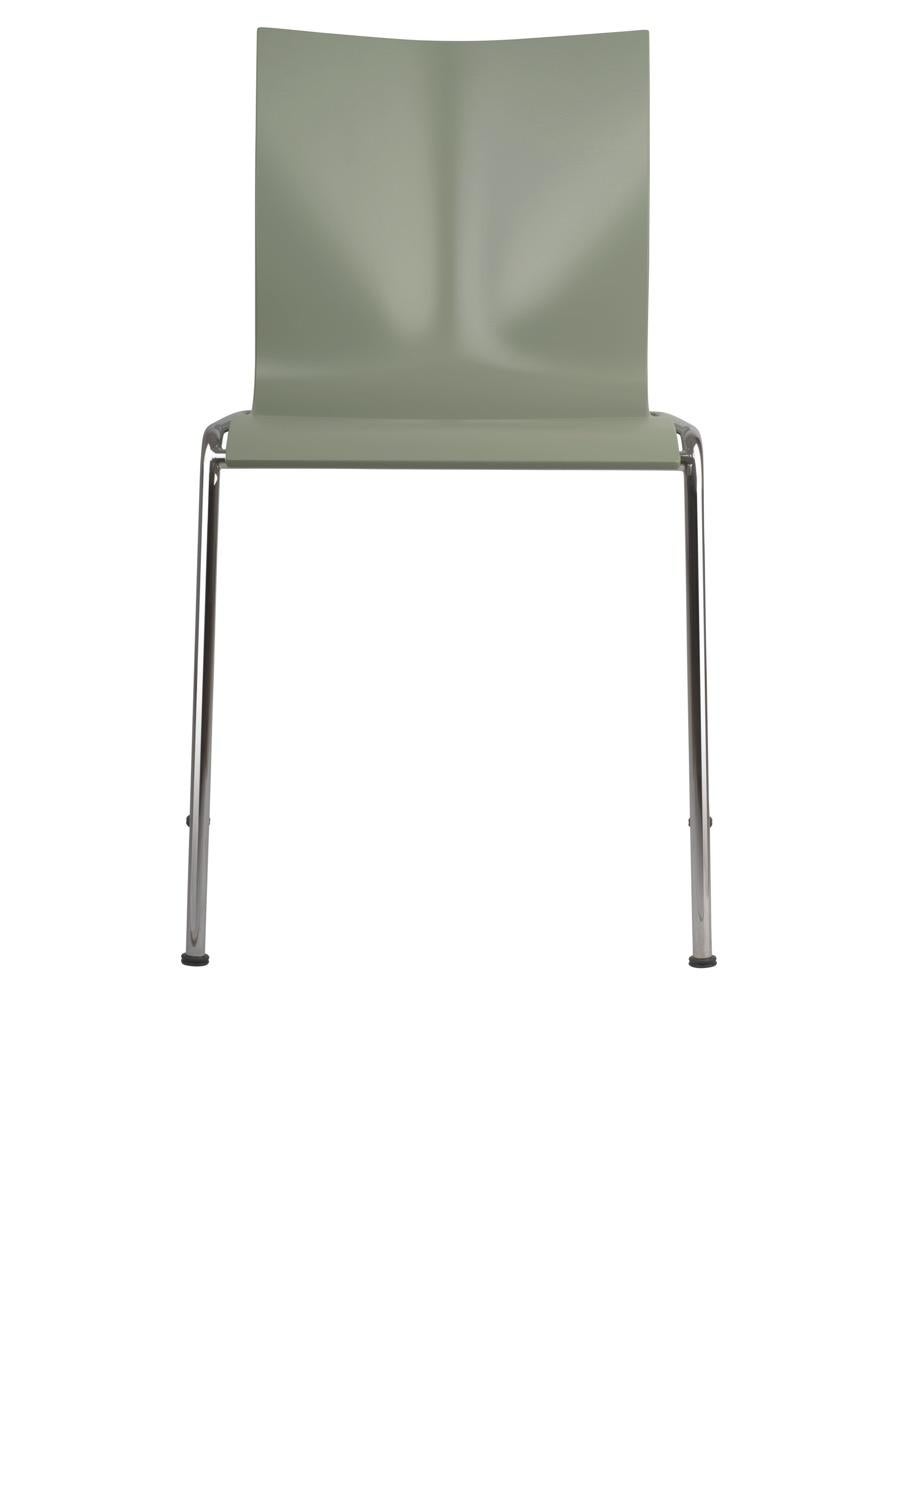 Chairik 101

Cement grey

Chairik 101 stacking chair with four-legged base, 16 mm tube in polished chrome. Shell in lacquer. 
Color: Cement grey

Dimensions
H 75 X SH 45 X D 54 X W 50 CM

Designer
Erik Magnussen.

    